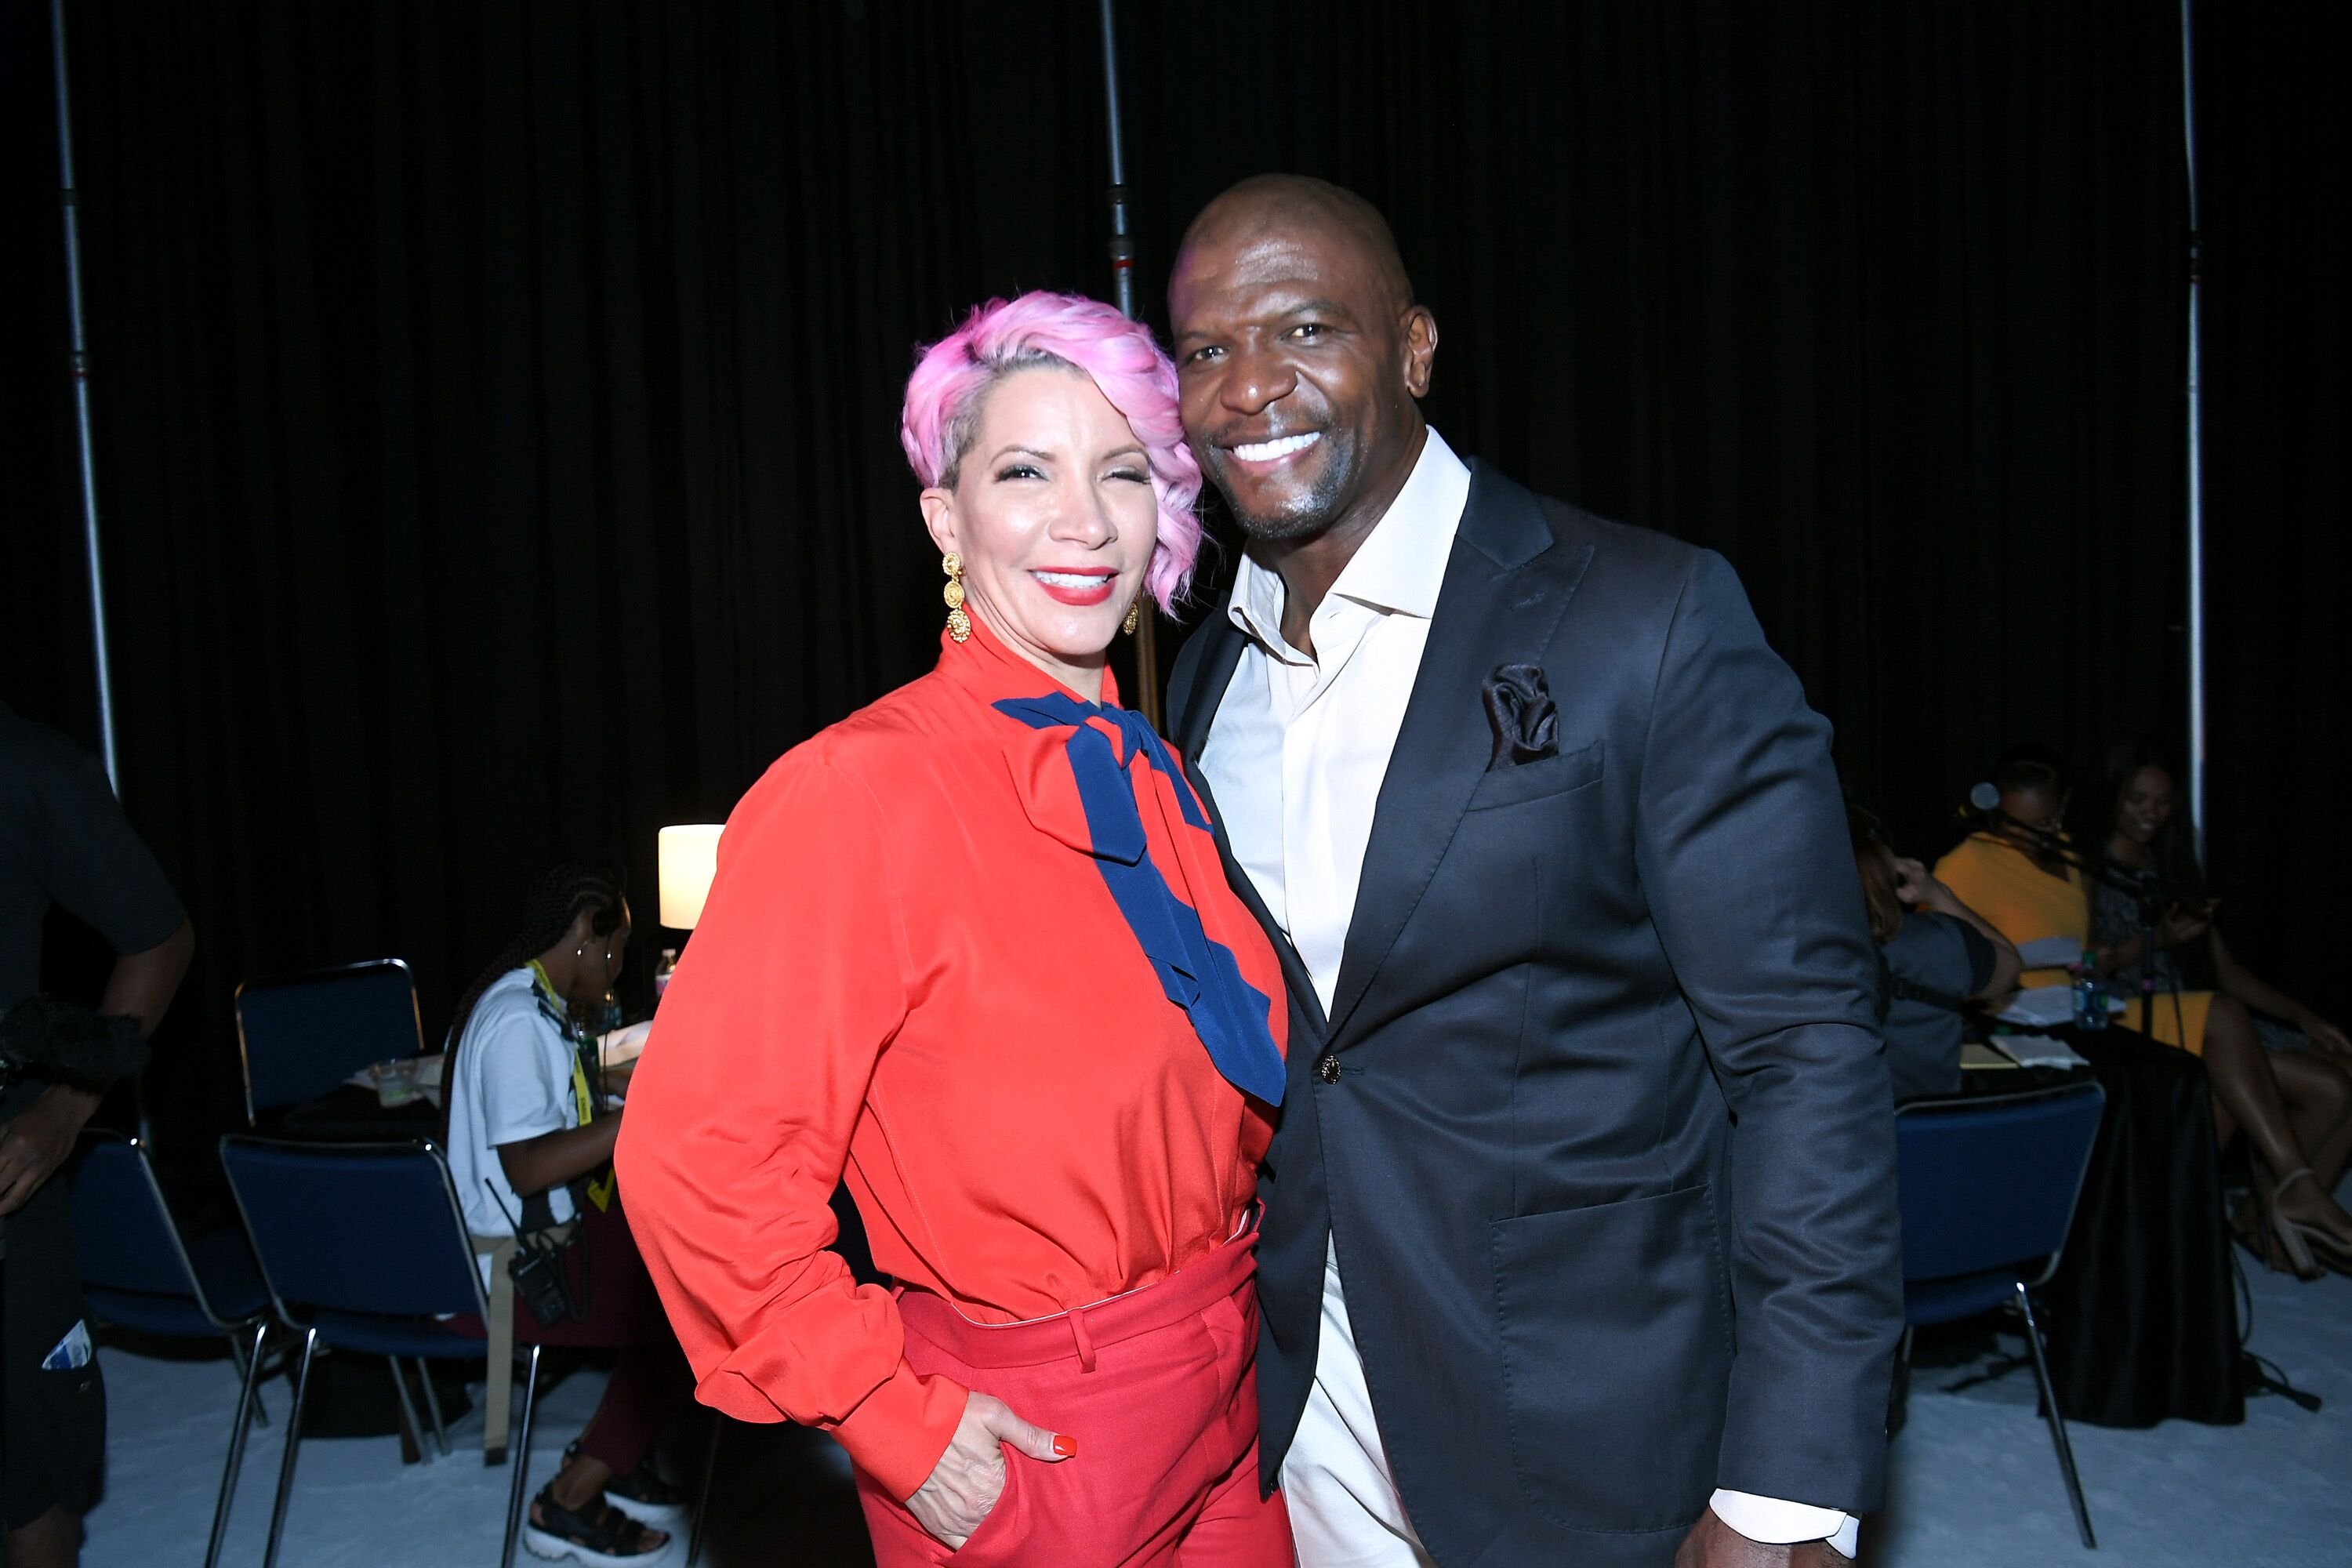 Rebecca King-Crews and Terry Crews backstage during 2019 ESSENCE Festival. | Source: Getty Images